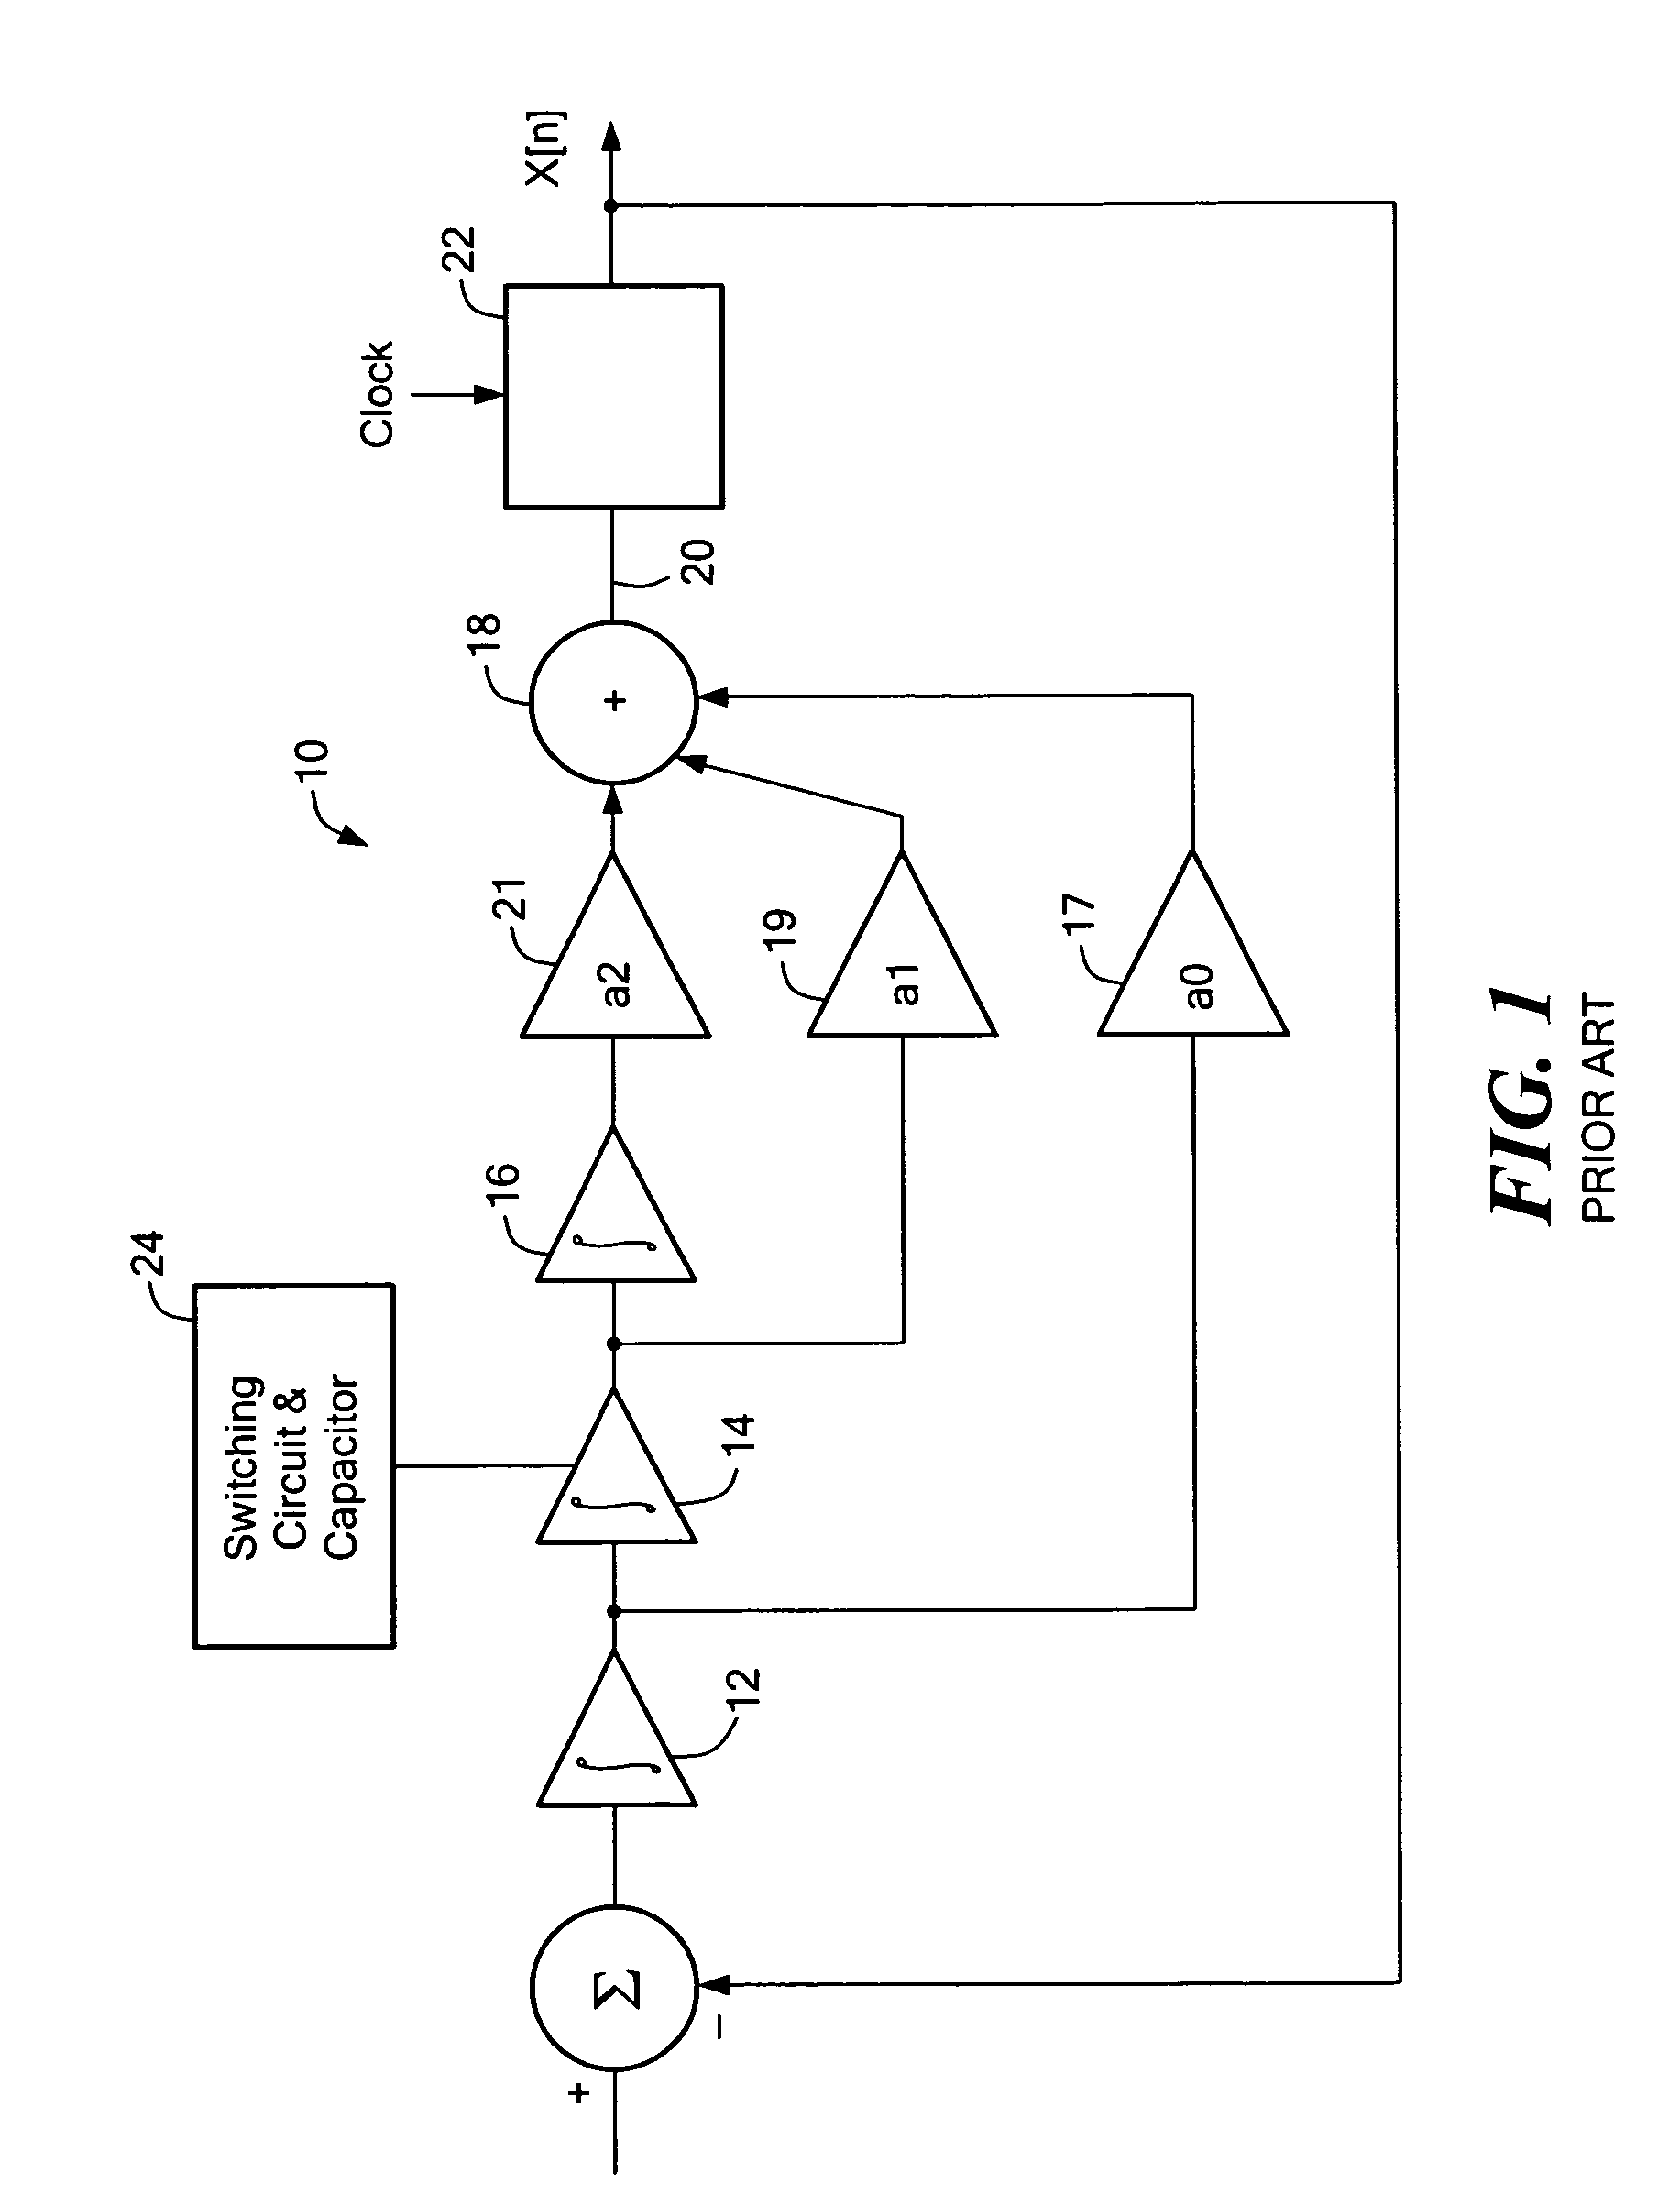 Apparatus and method for controlling the state variable of an integrator stage in a modulator